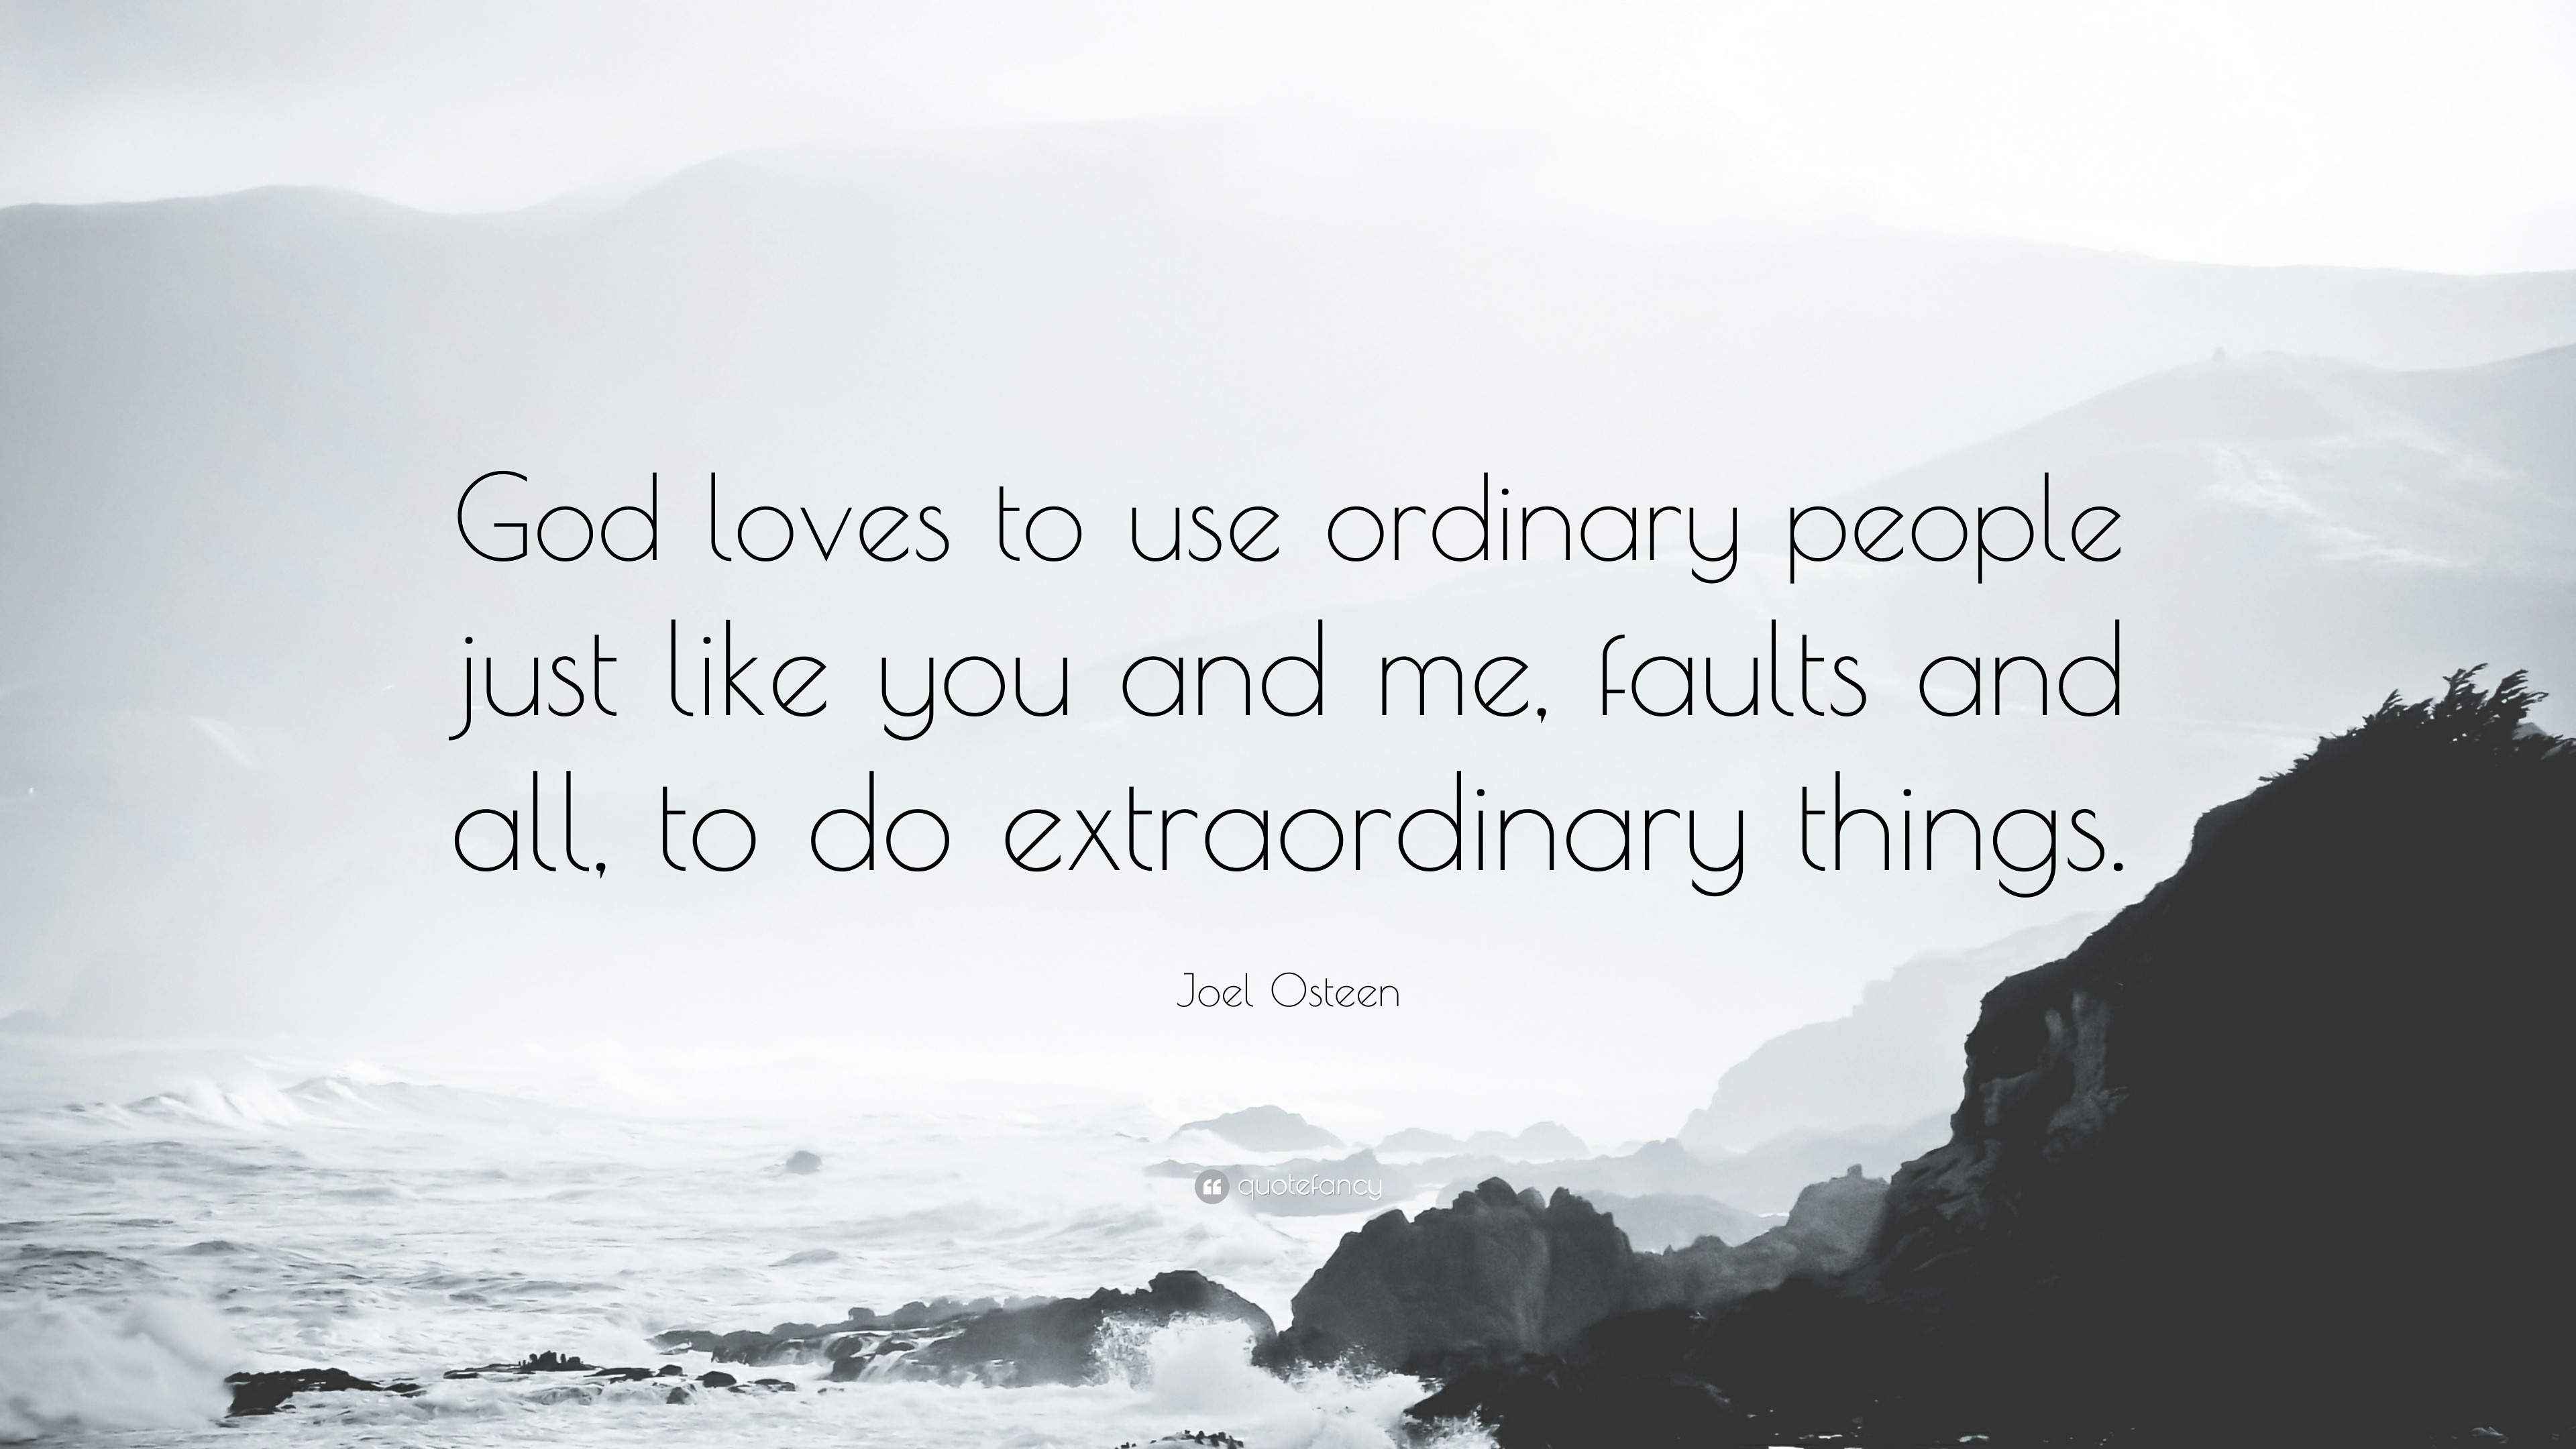 Joel Osteen Quote “God loves to use ordinary people just like you and me